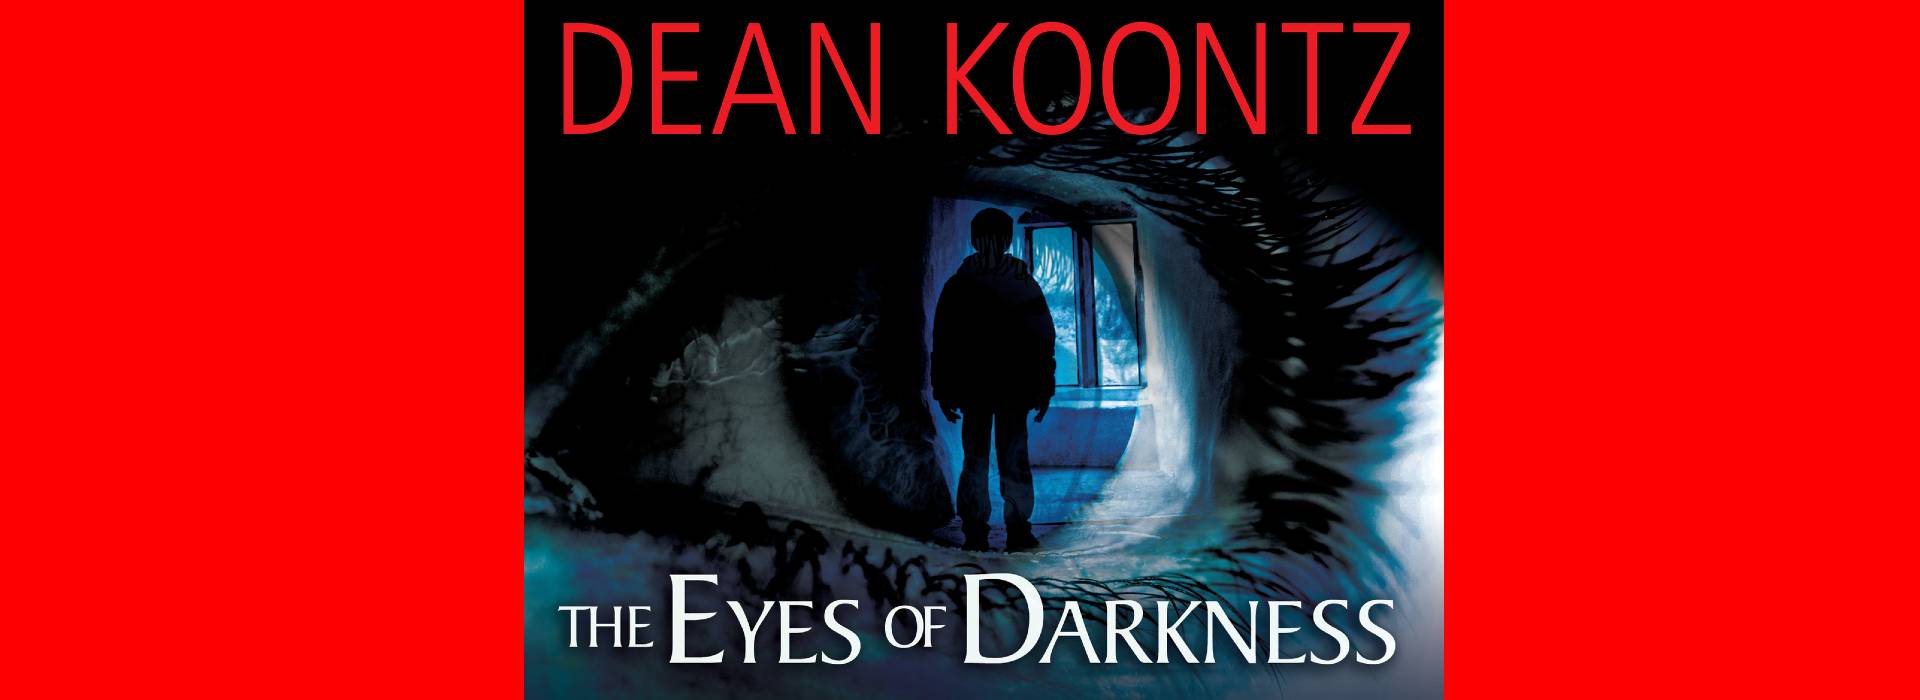 "The eyes of darkness" il libro Dean Koontz